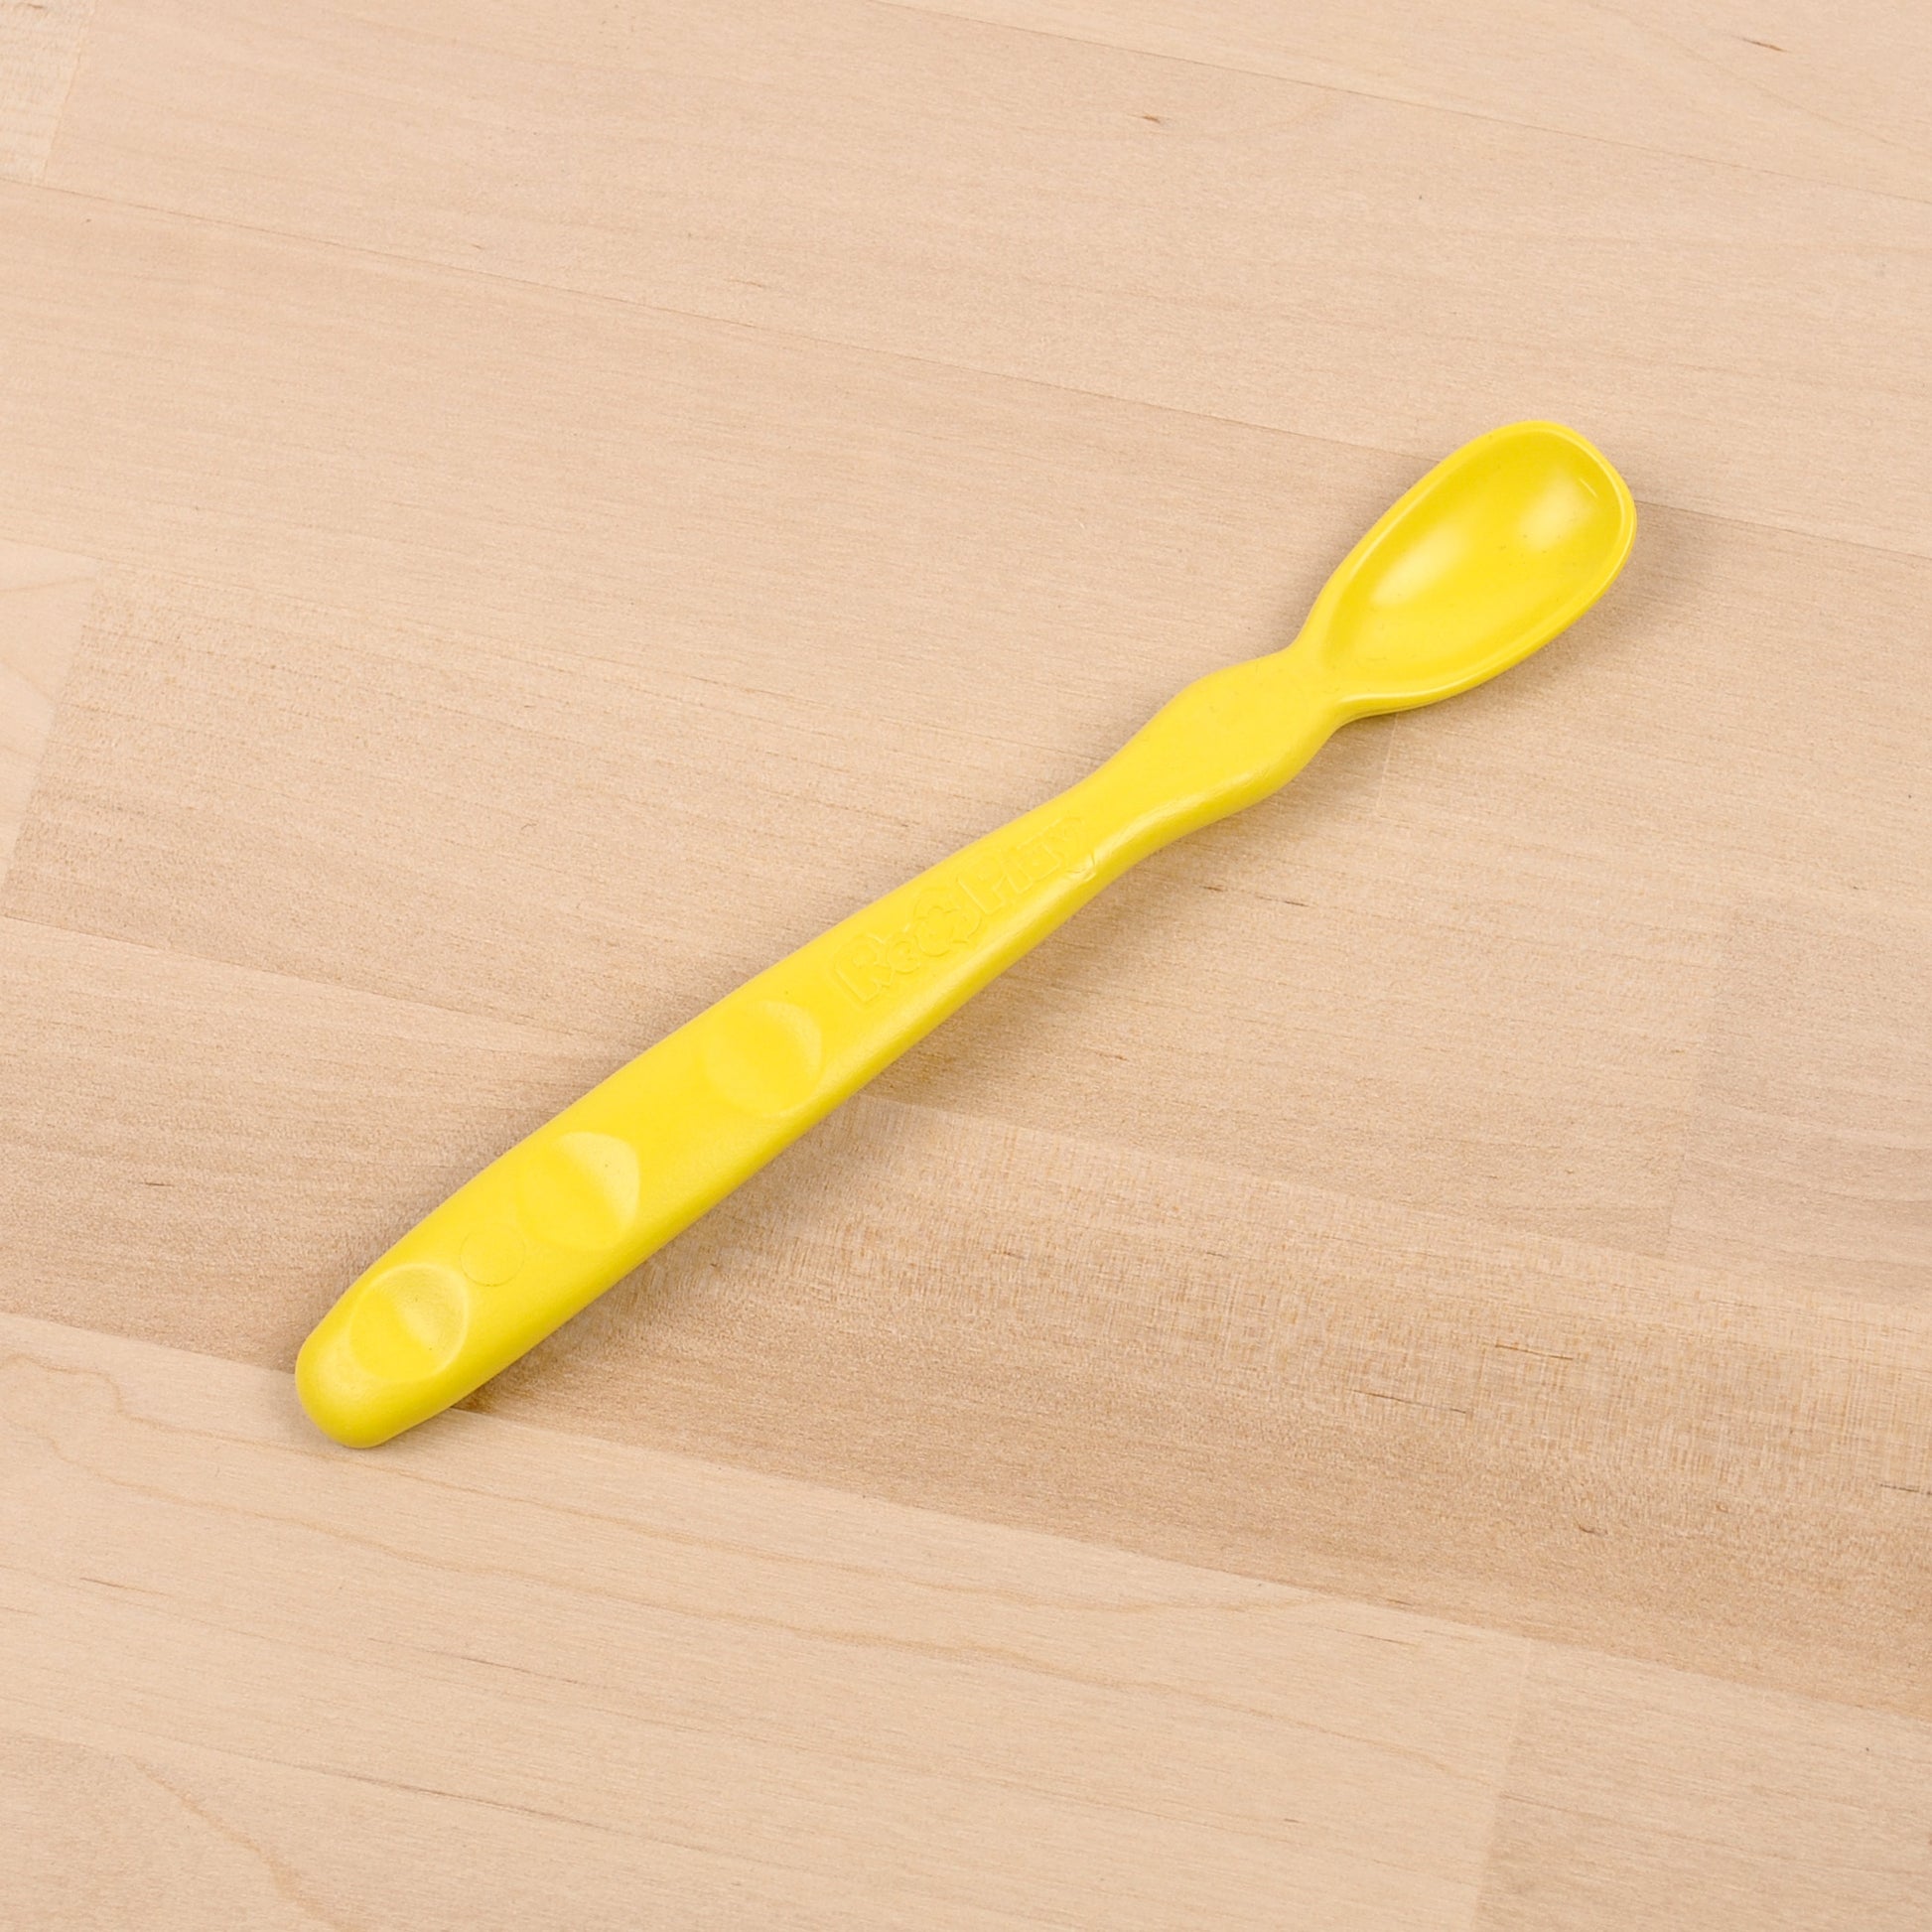 Re-Play Infant Spoon in Yellow from Bear & Moo